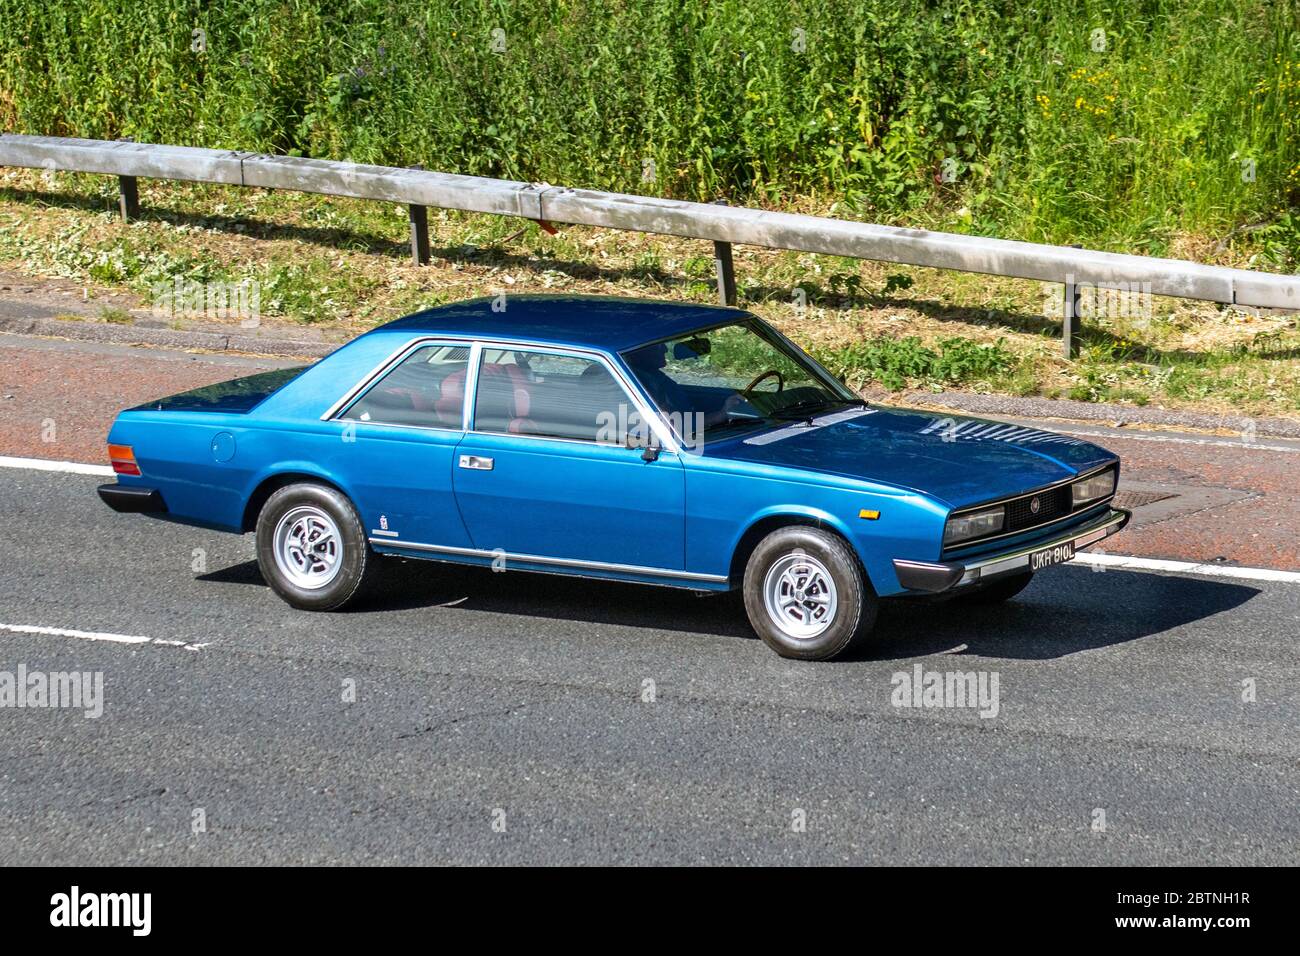 1972 Blue Fiat 130; Vehicular traffic moving vehicles, classic cars, cherished, veteran, old timer, restored, collectible, motors, vintage, heritage, old preserved, collectable cars driving vehicle on UK roads, motoring on the M6 motorway highway Stock Photo